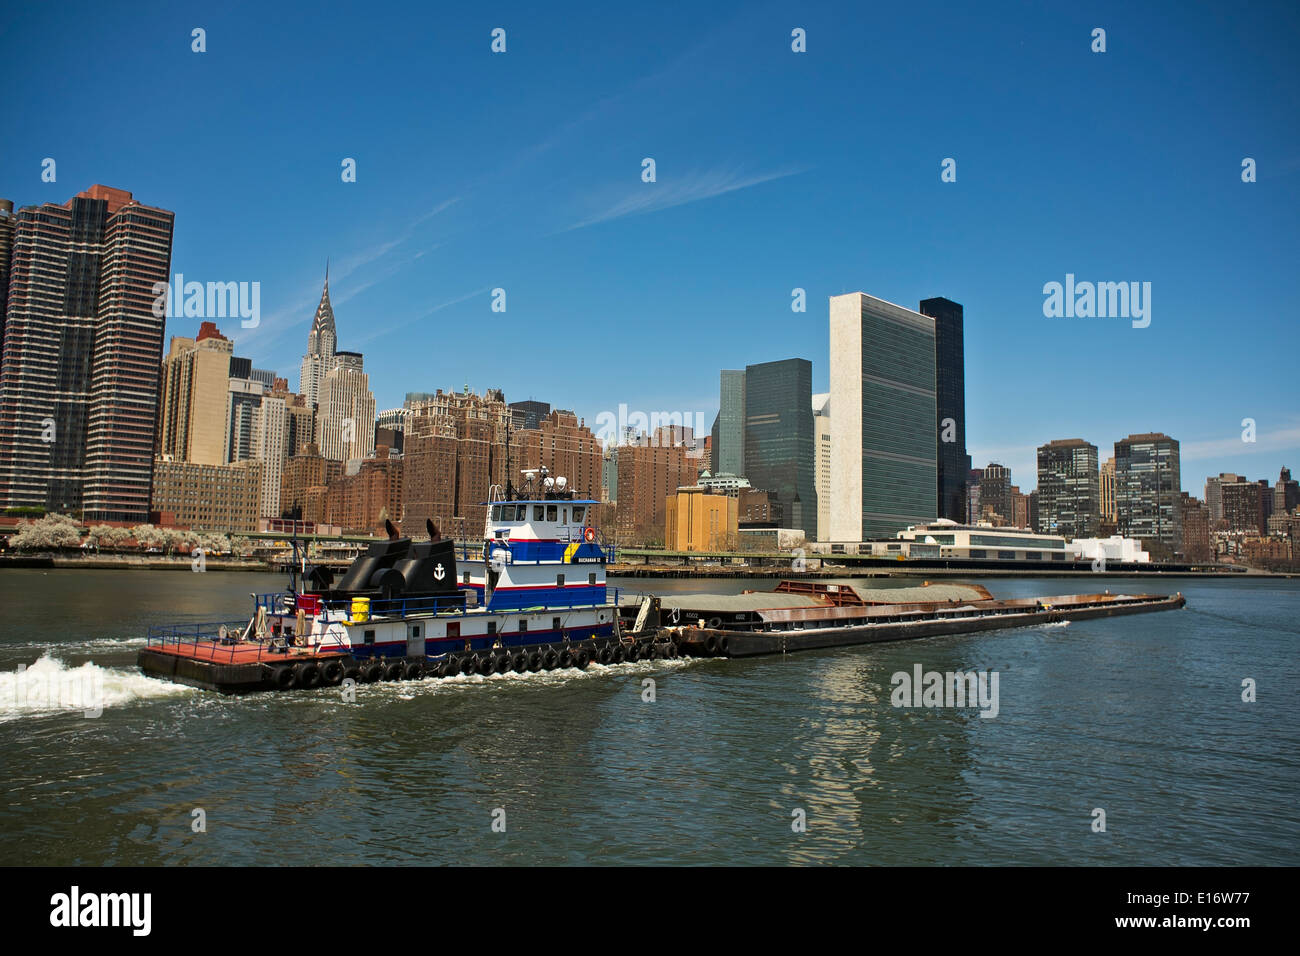 Tugboat pushing barges of gravel on New York City's East River, Chrysler Building and United Nations building in background Stock Photo